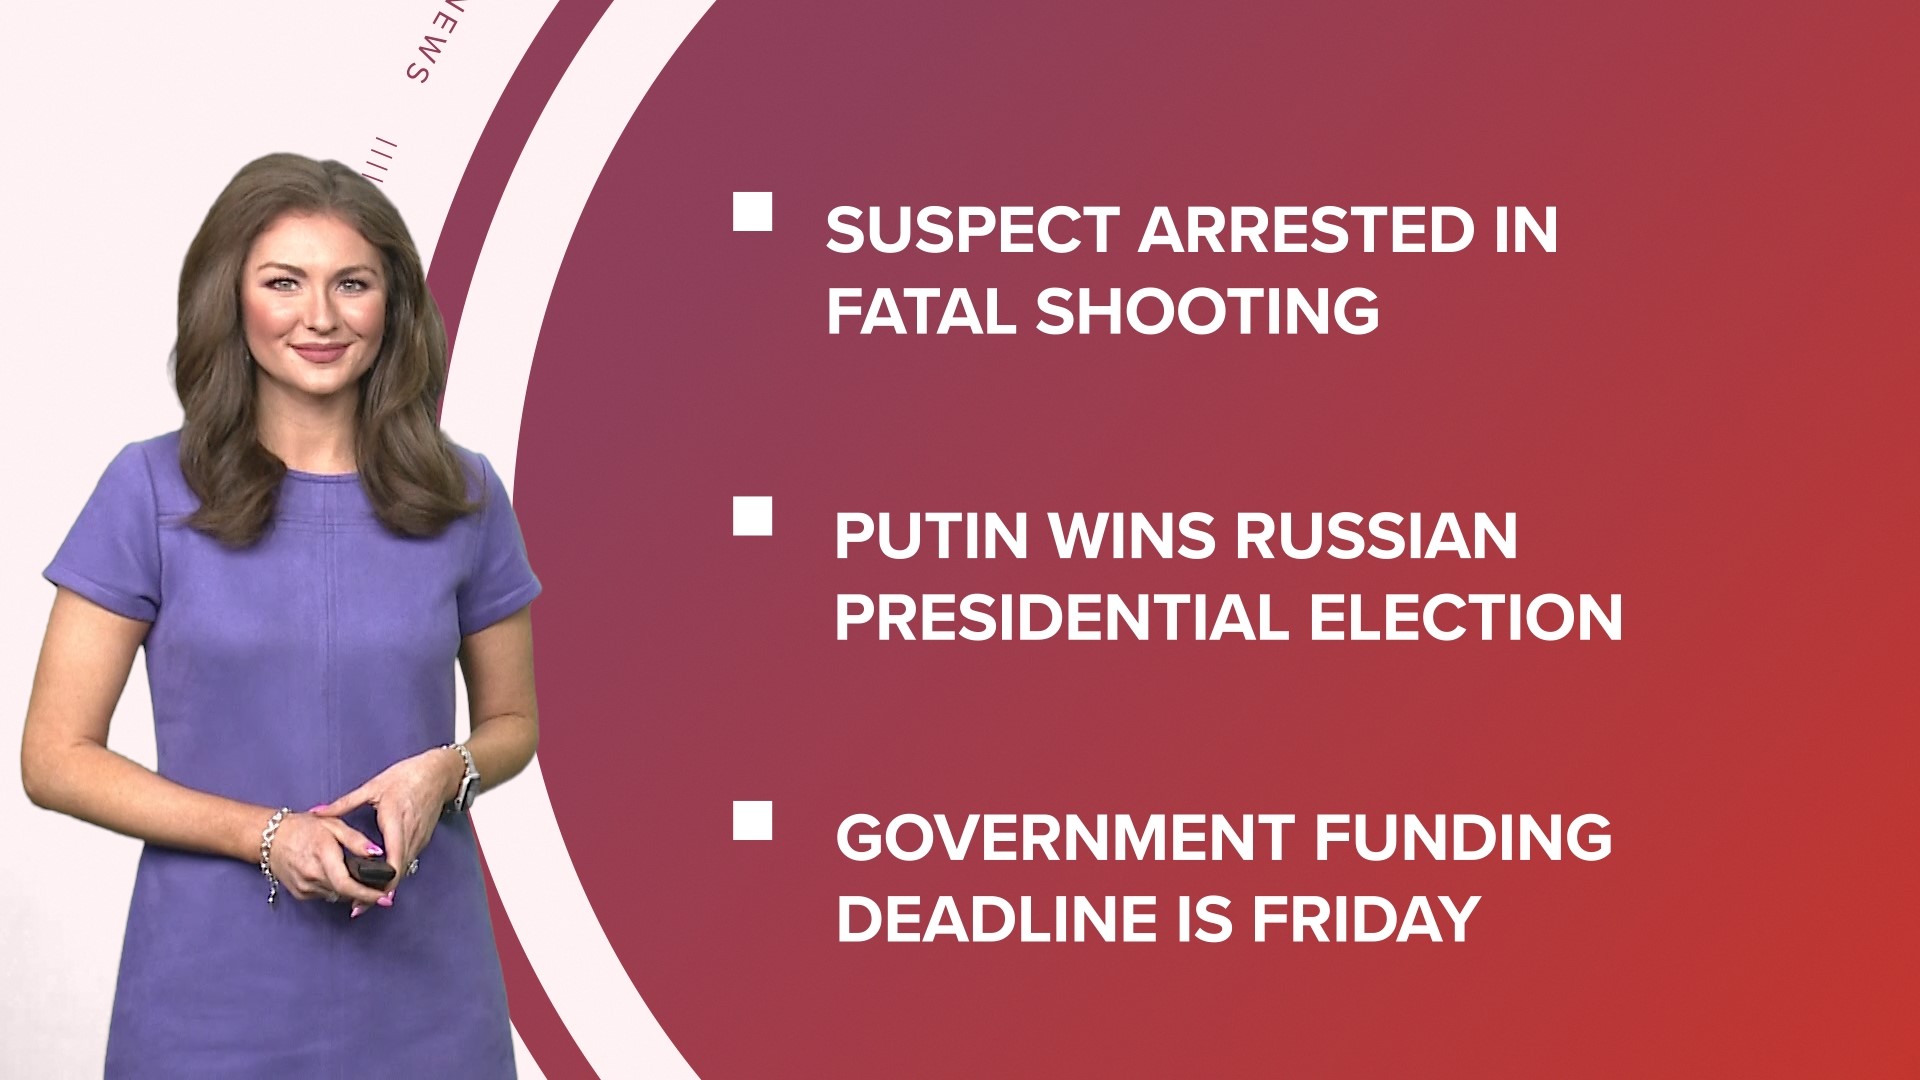 A look at what is happening in the news from Putin wins the Russian presidential election to Target self-checkout update and realtor settlement impact home prices.